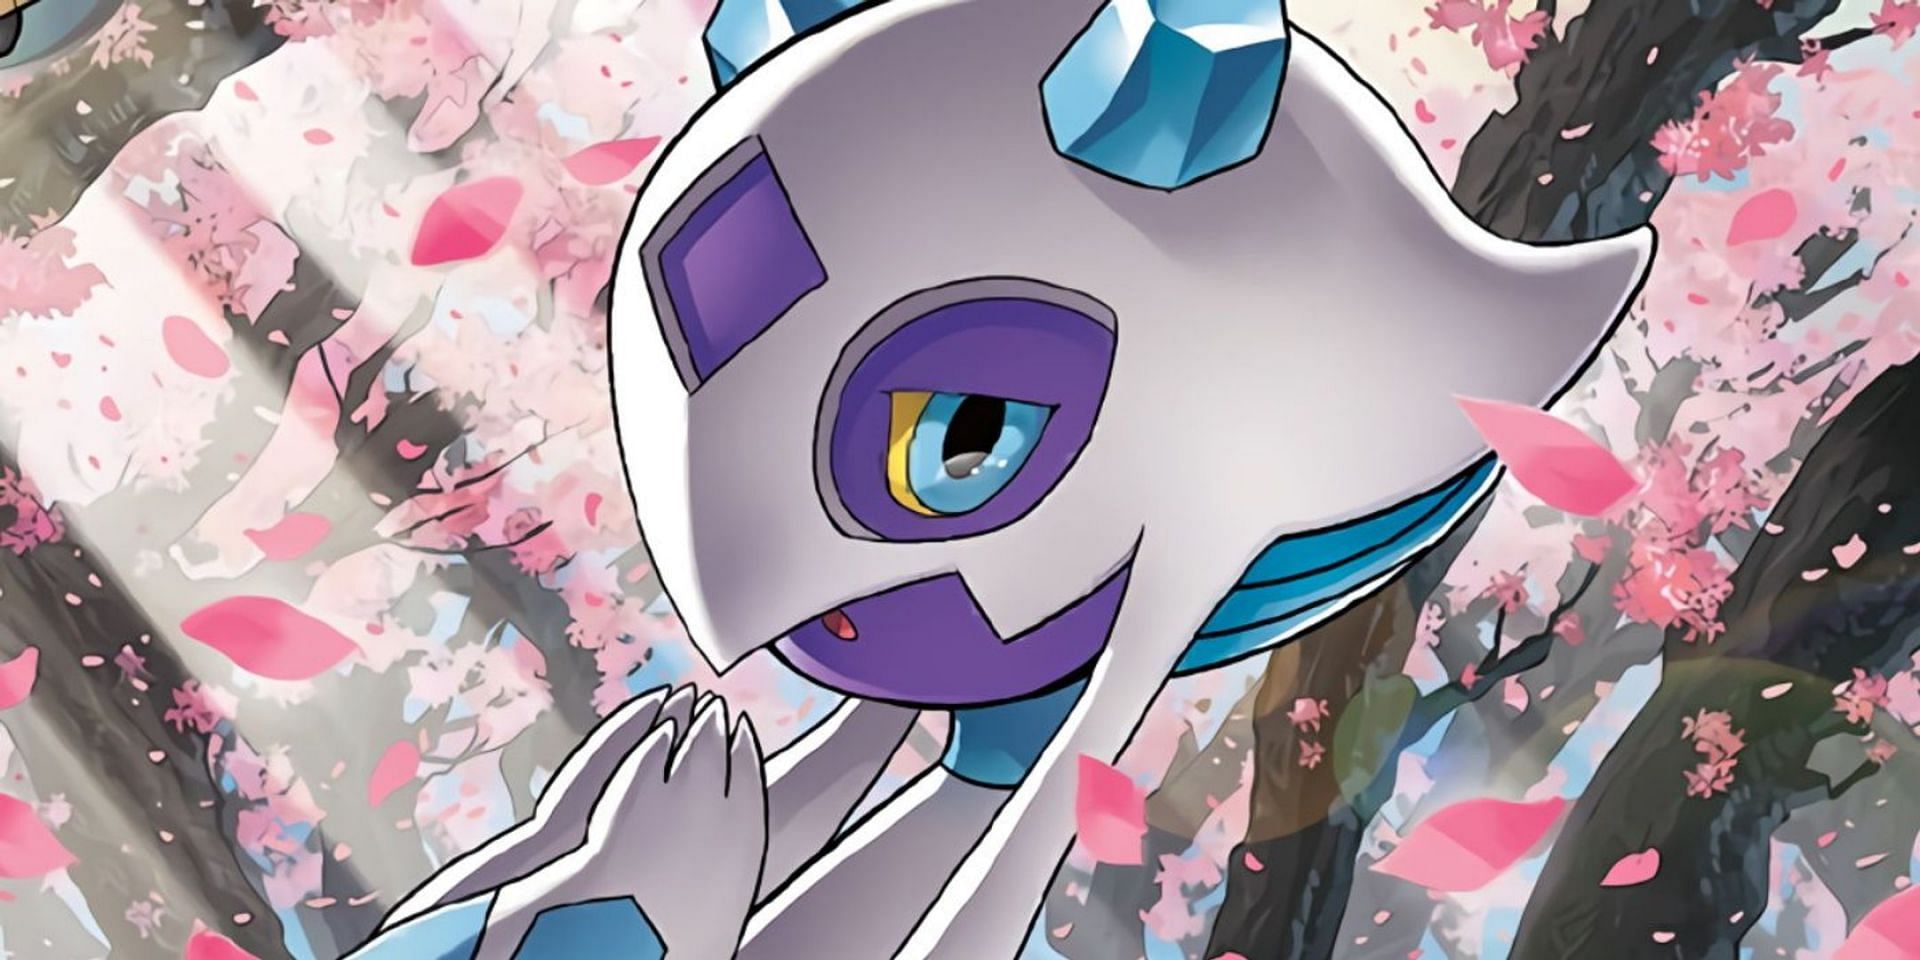 Froslass as it appears in the trading card game (Image via The Pokemon Company)